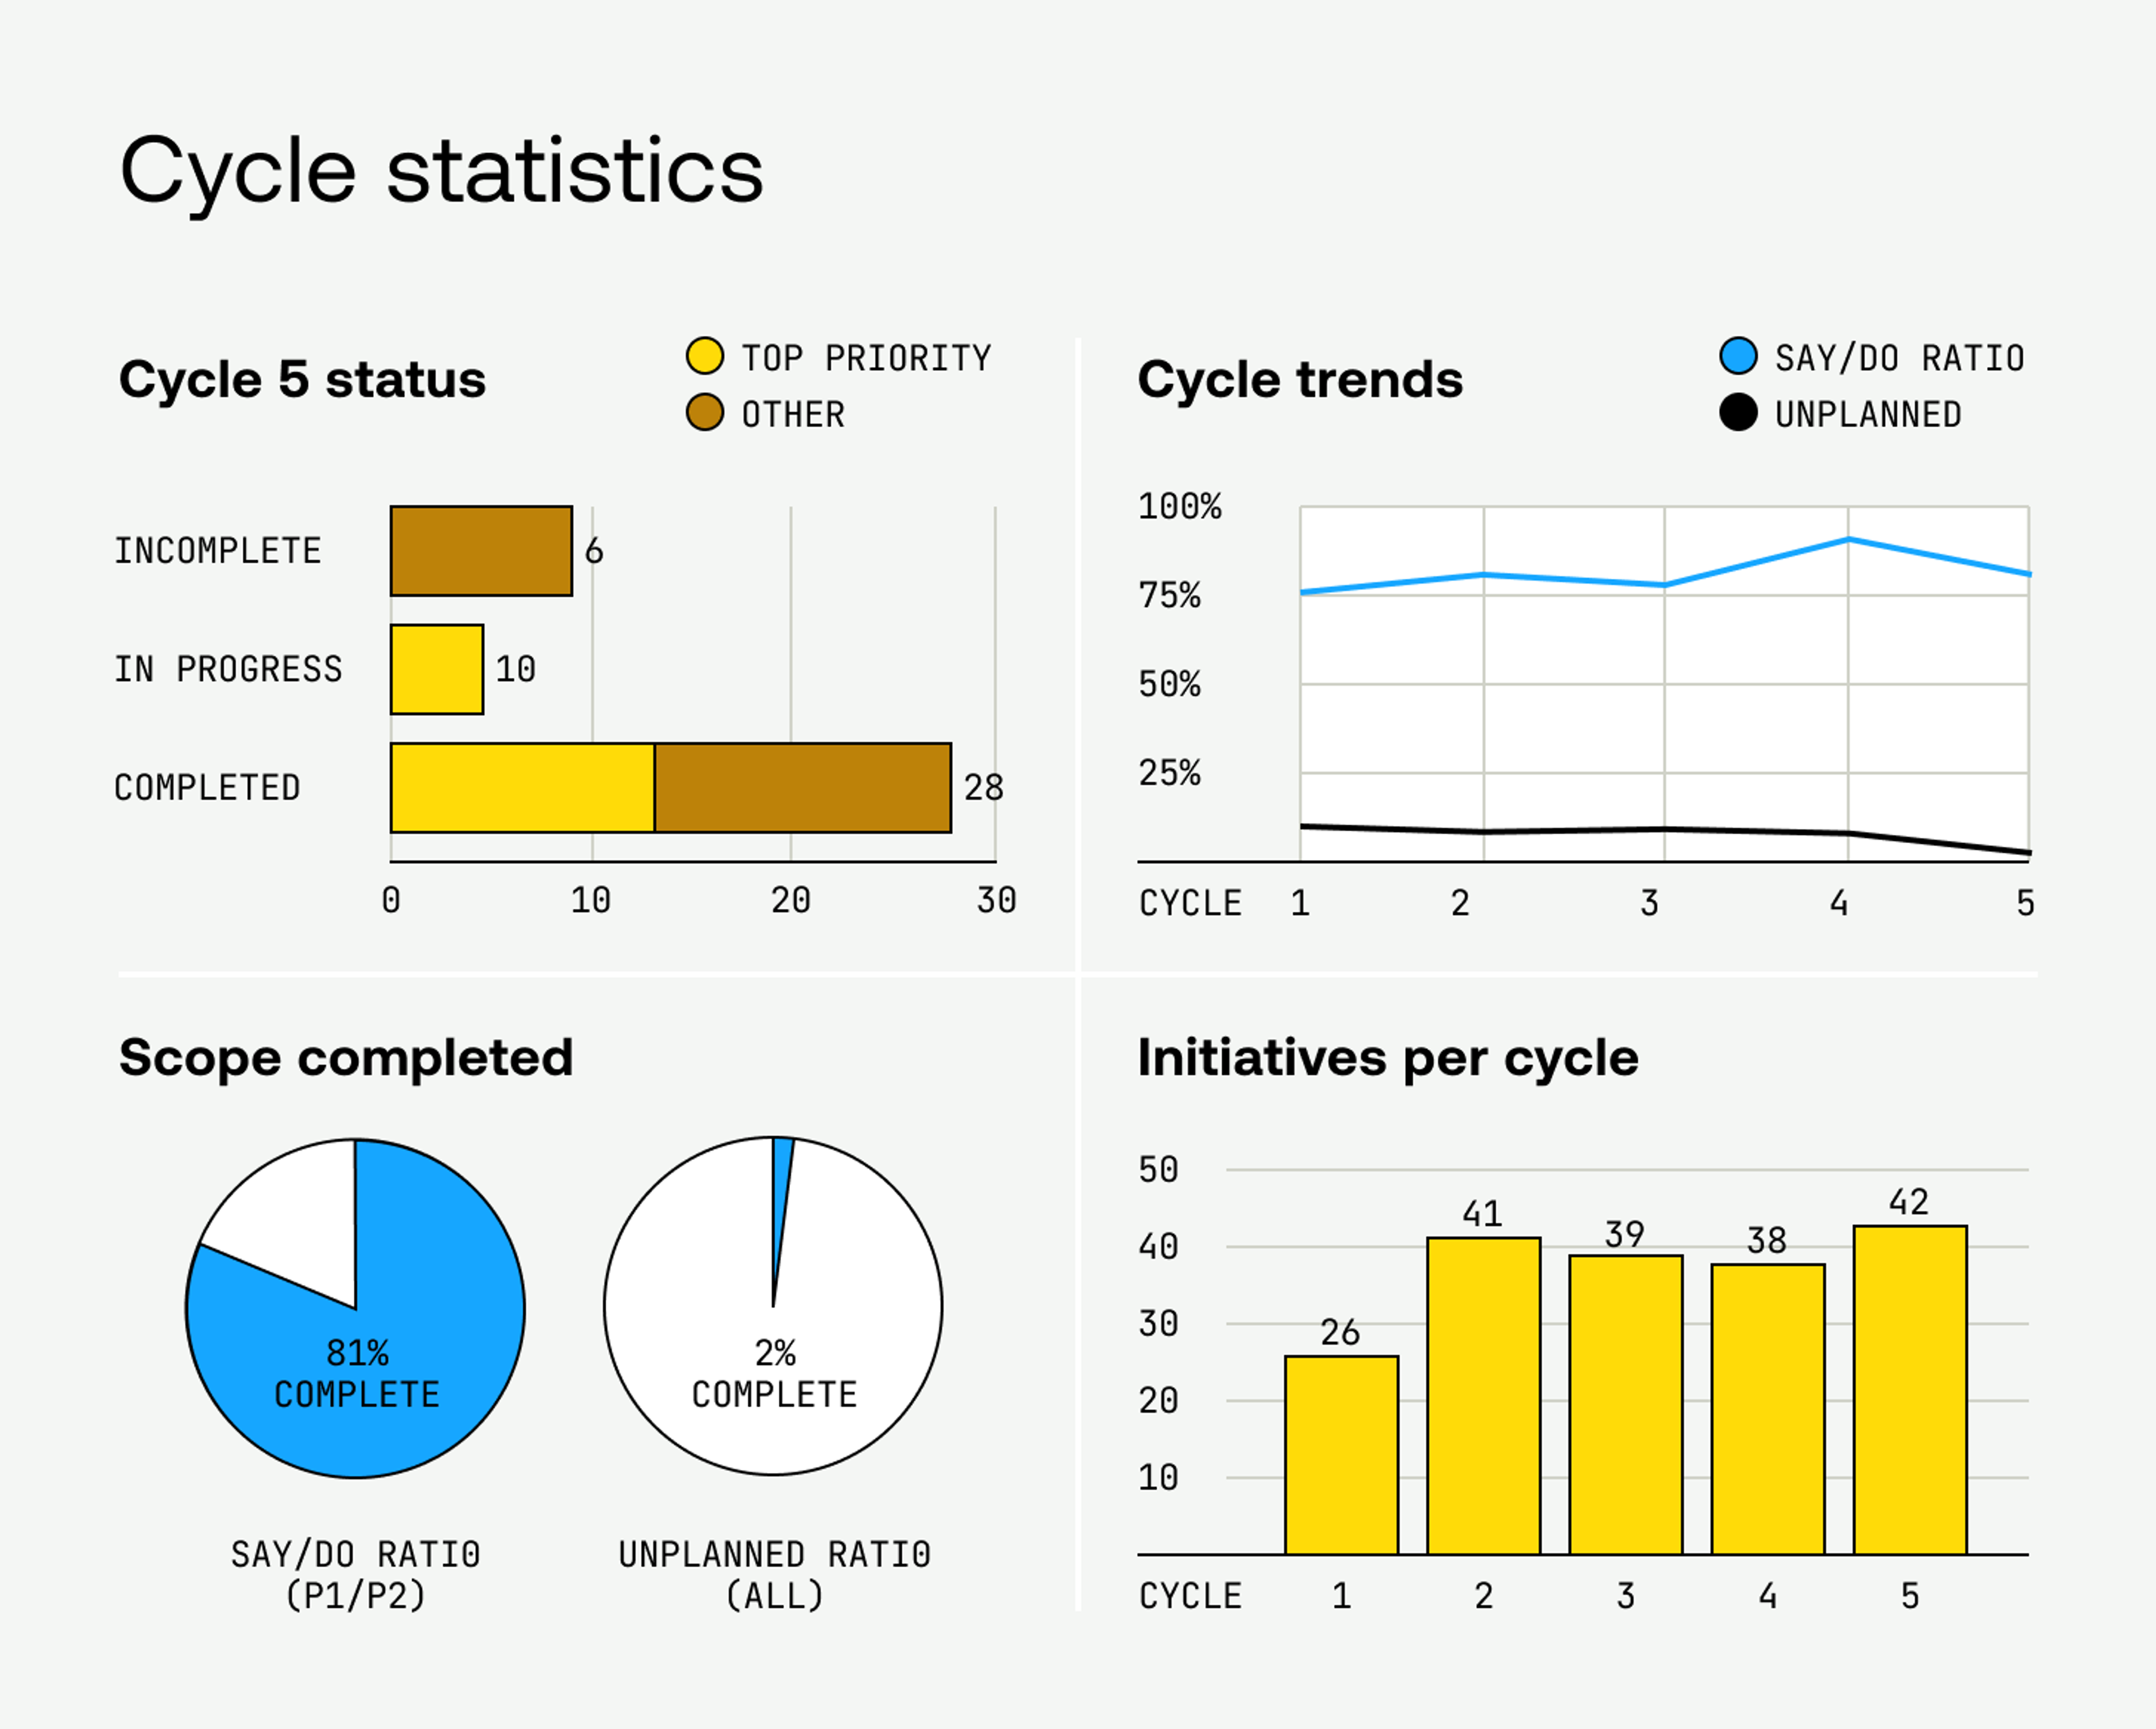 Example of charts with cycle results and say/do ratios. 